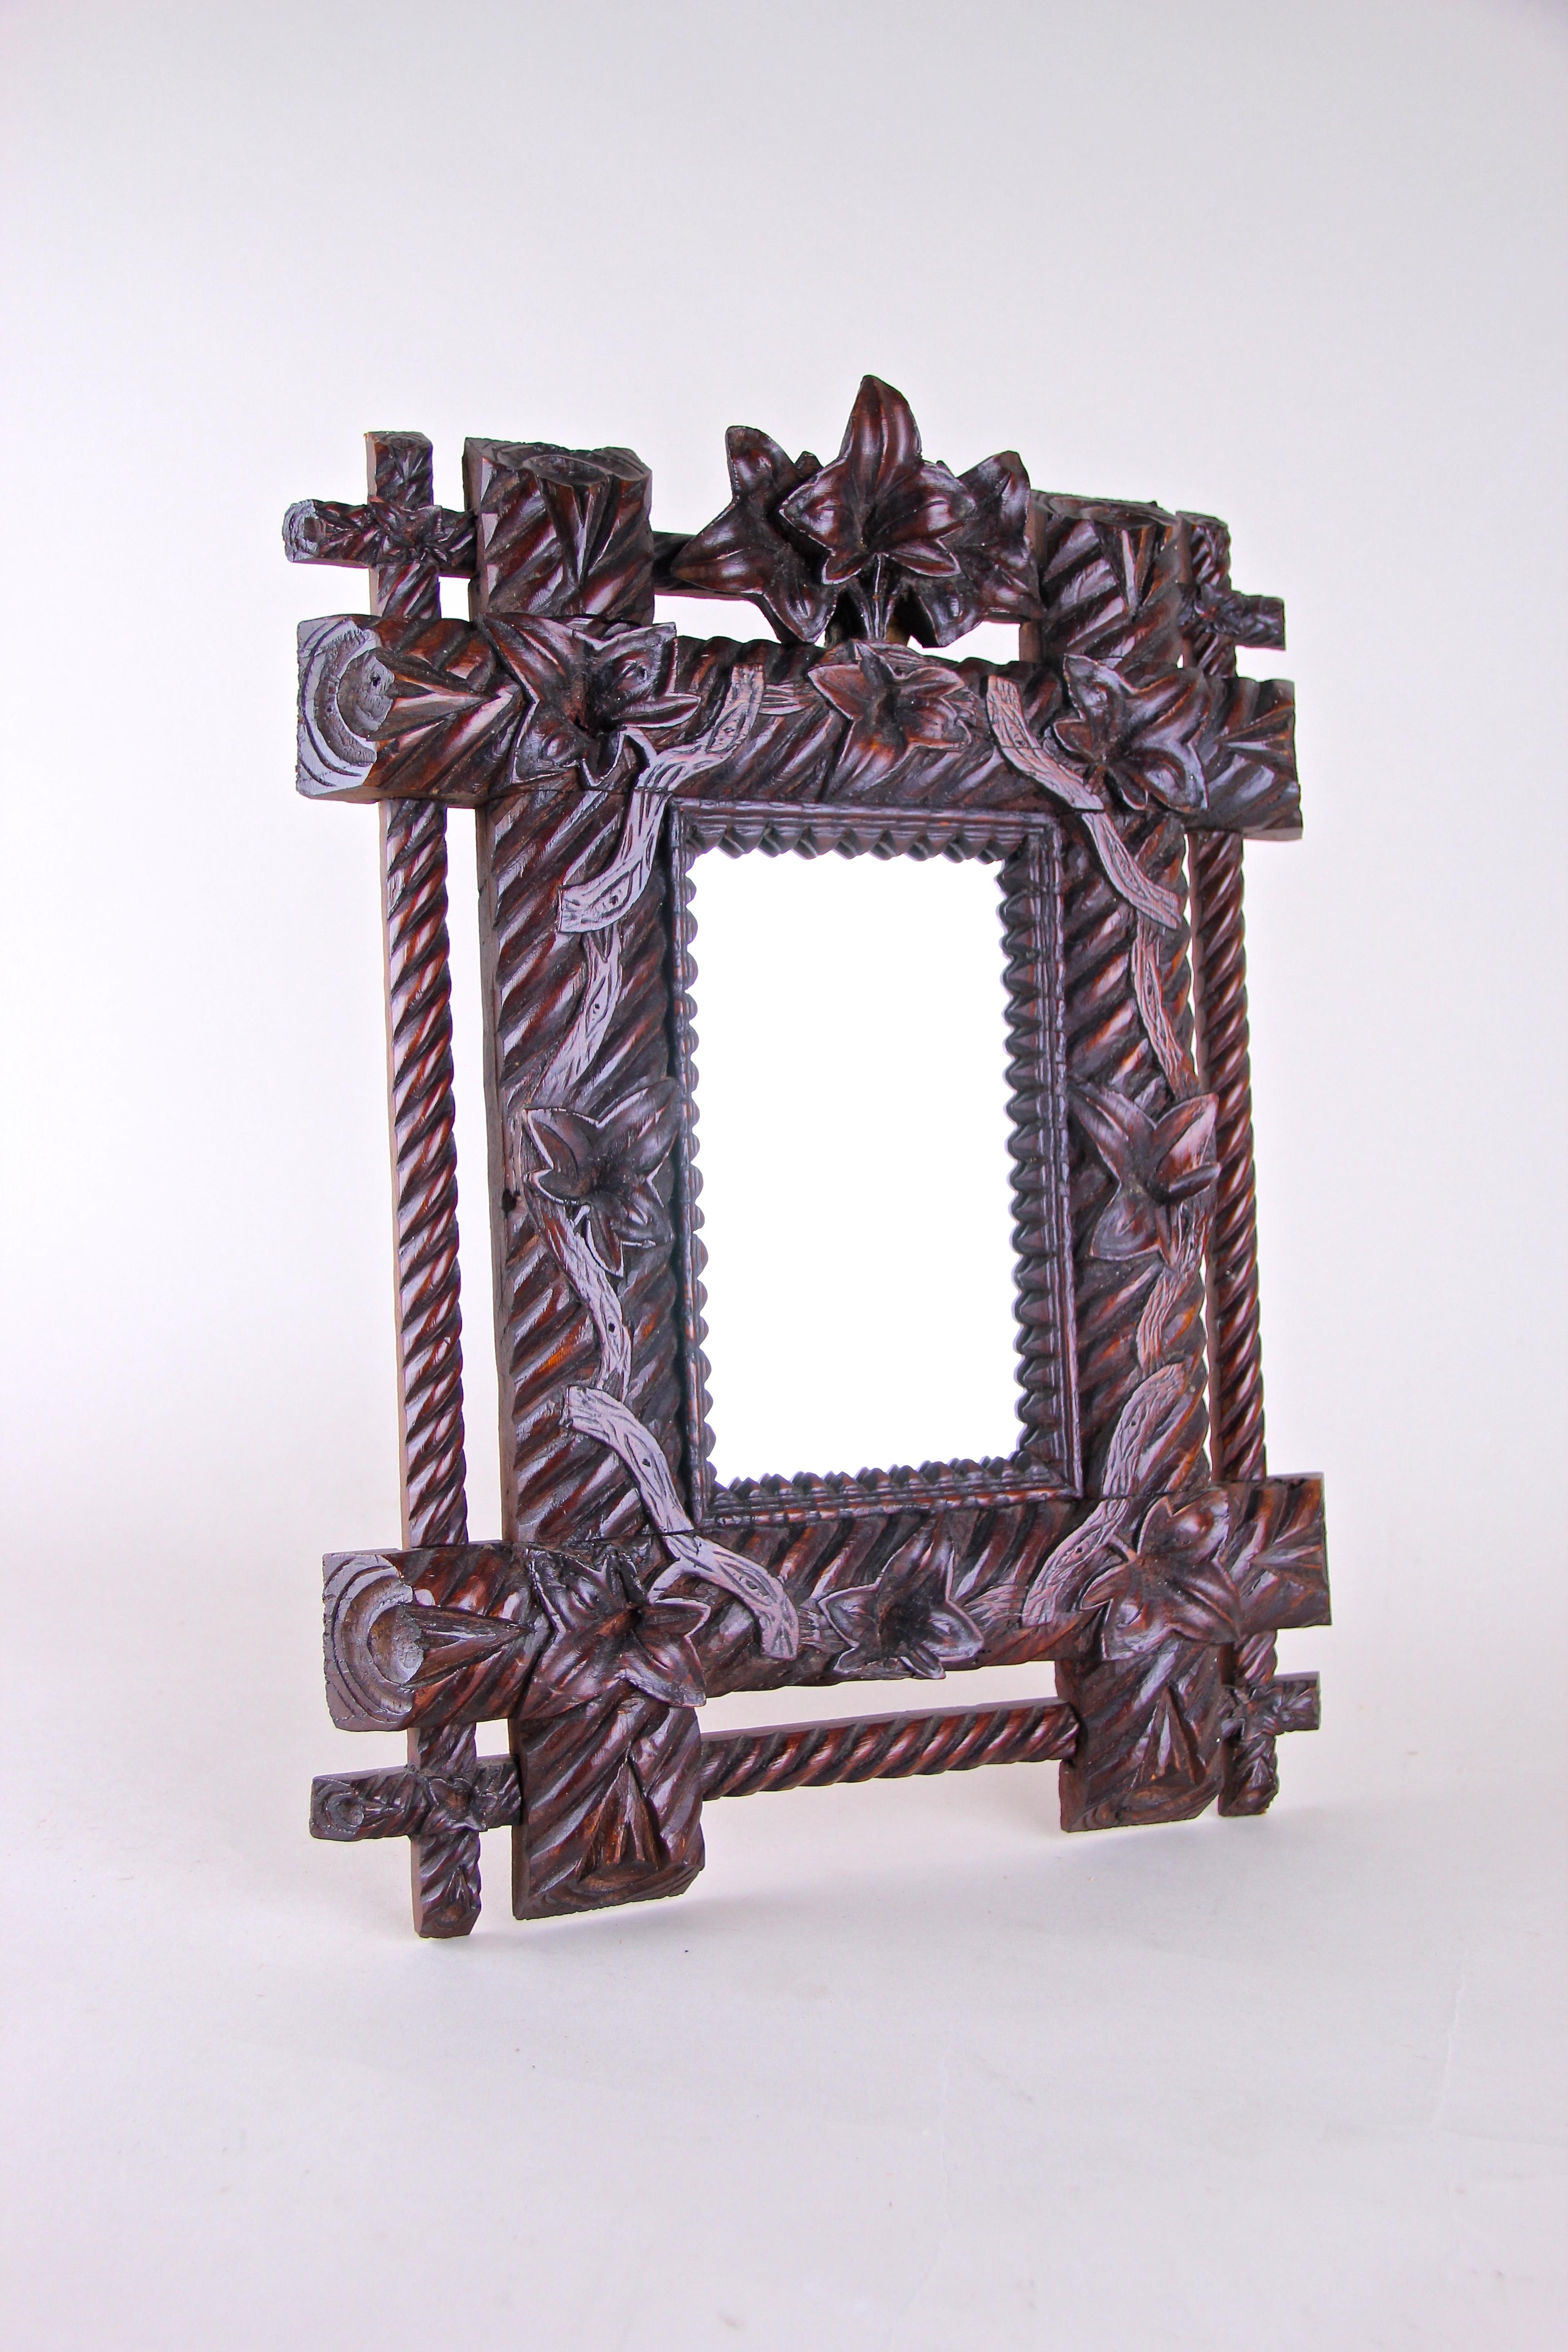 Fancy small rustic Black Forest wall mirror from the late 19th century in Germany around 1880. Hand carved out of basswood, the wide dark brown frame shows a matchless design combined with great worked bellflowers and tendrils. The bulky inner frame